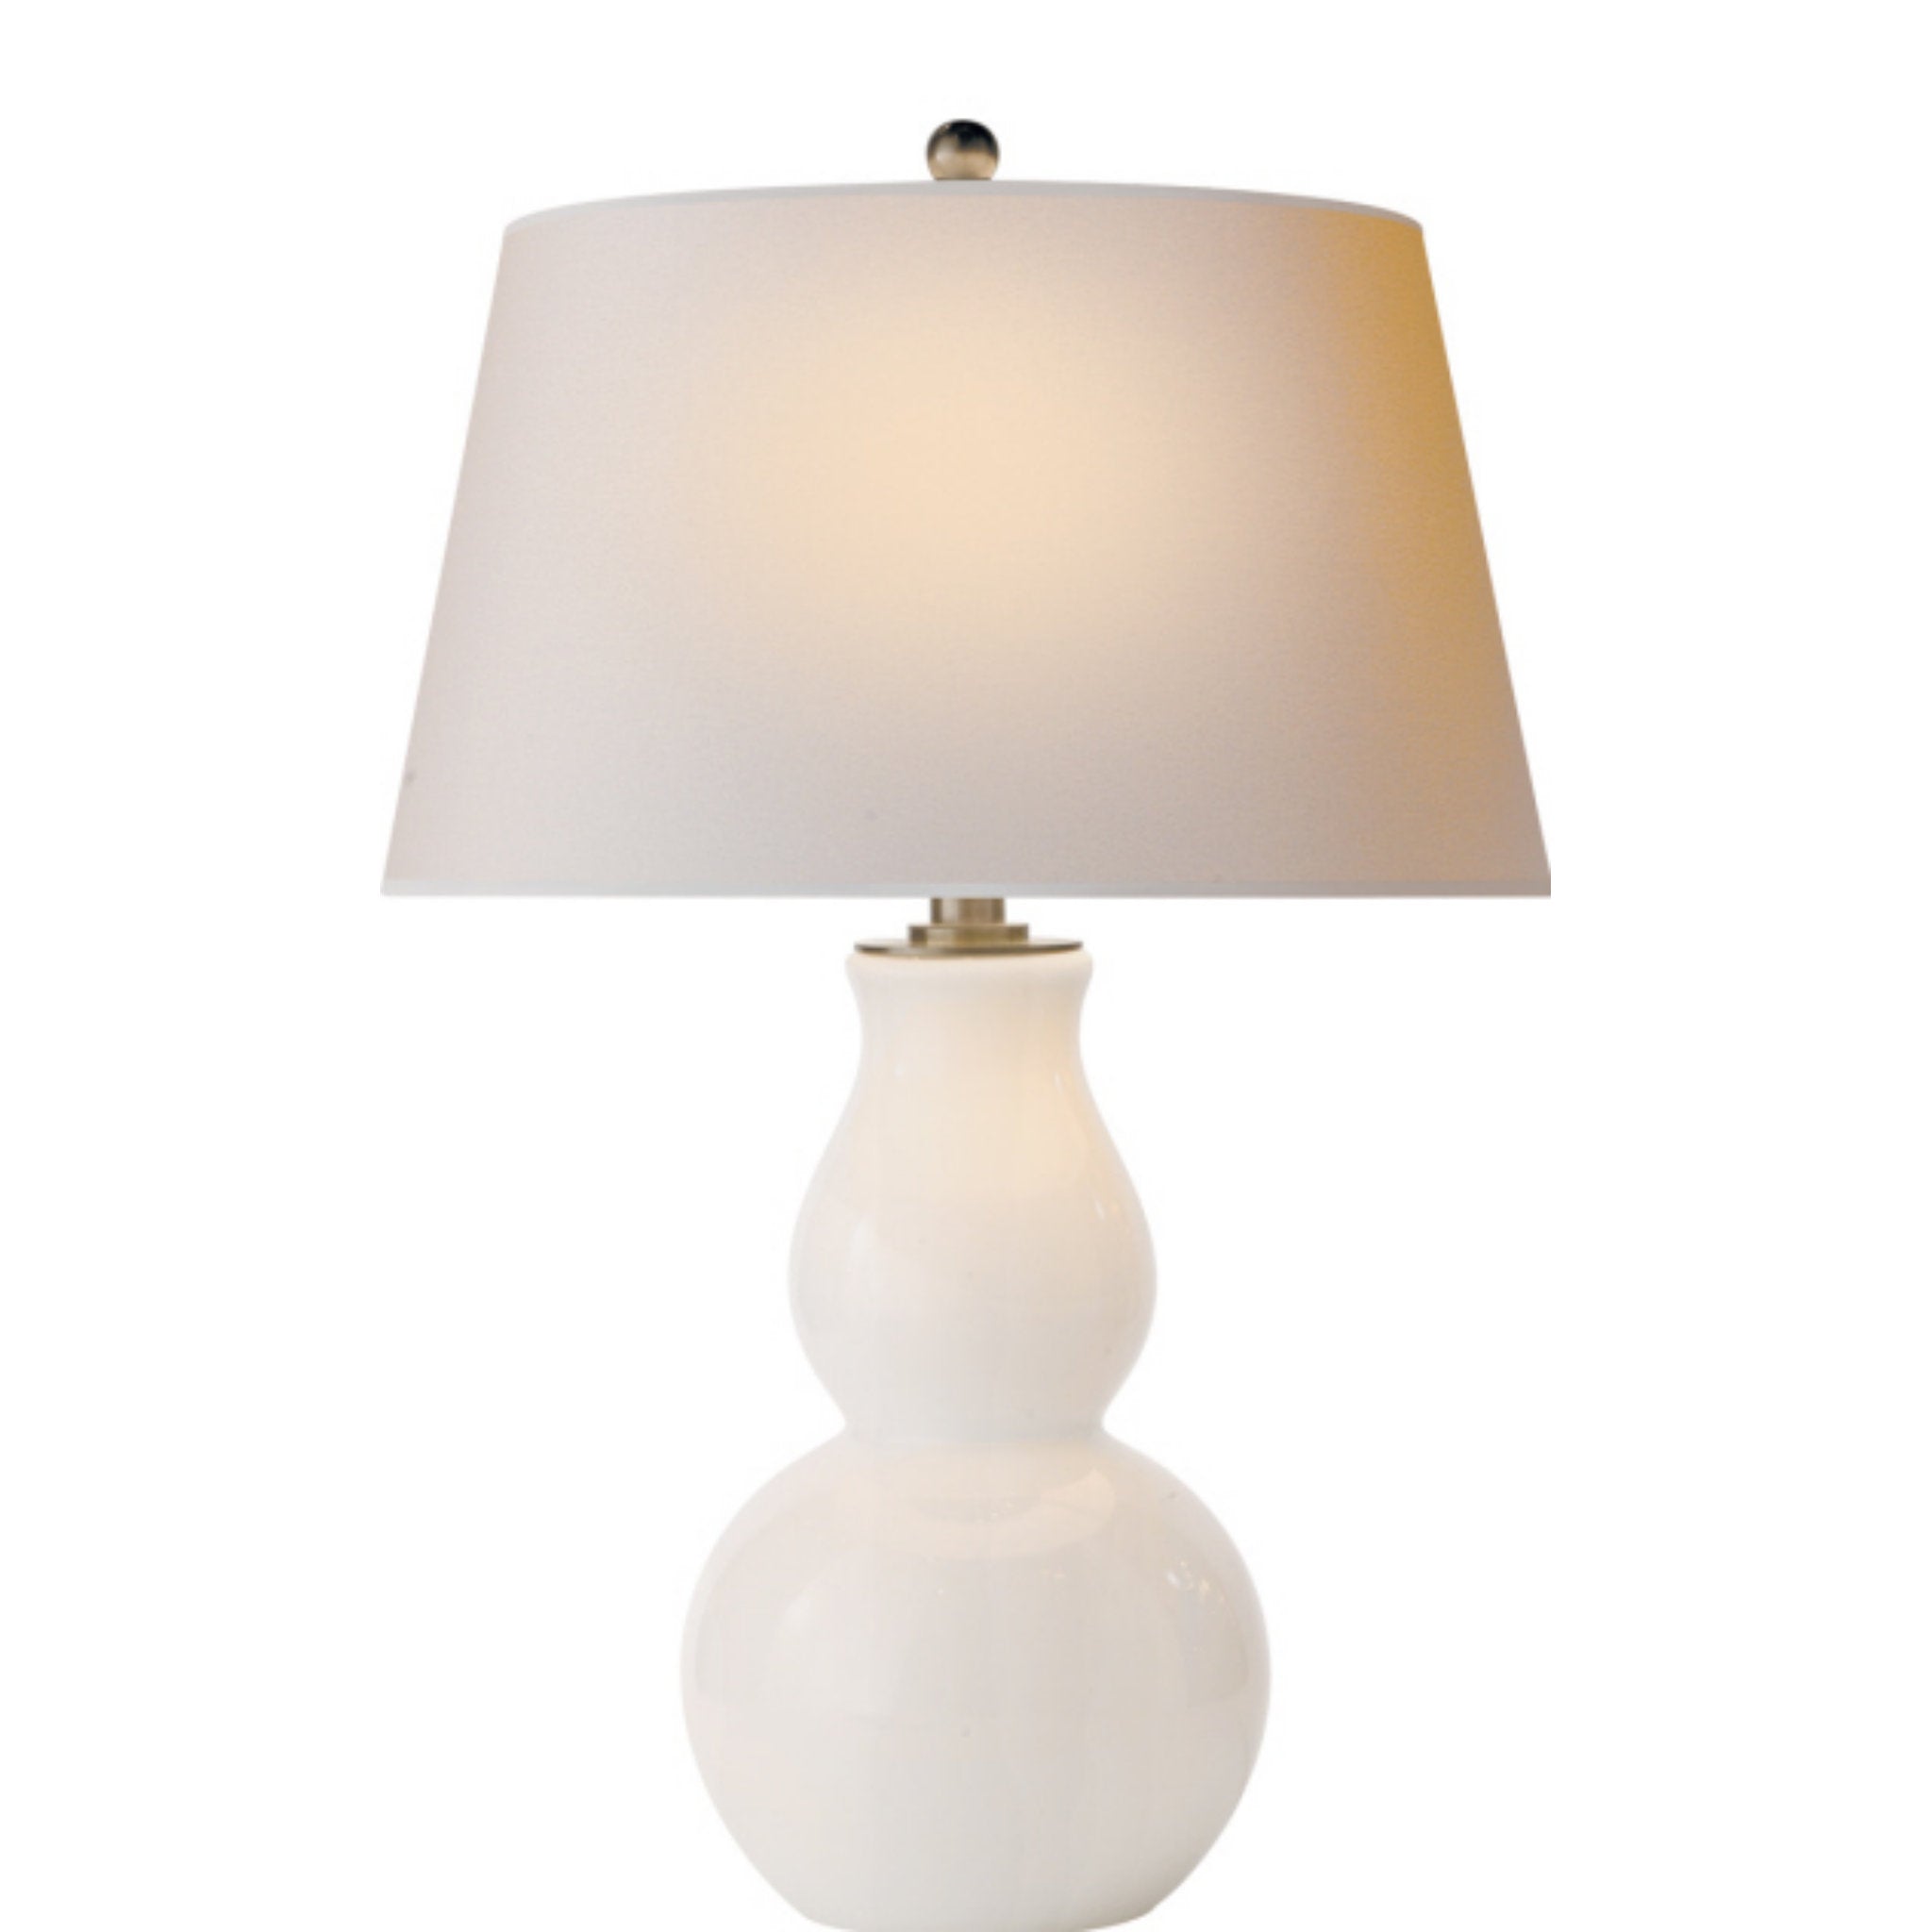 Chapman & Myers Open Bottom Gourd Table Lamp in White Glass with Natural Paper Shade